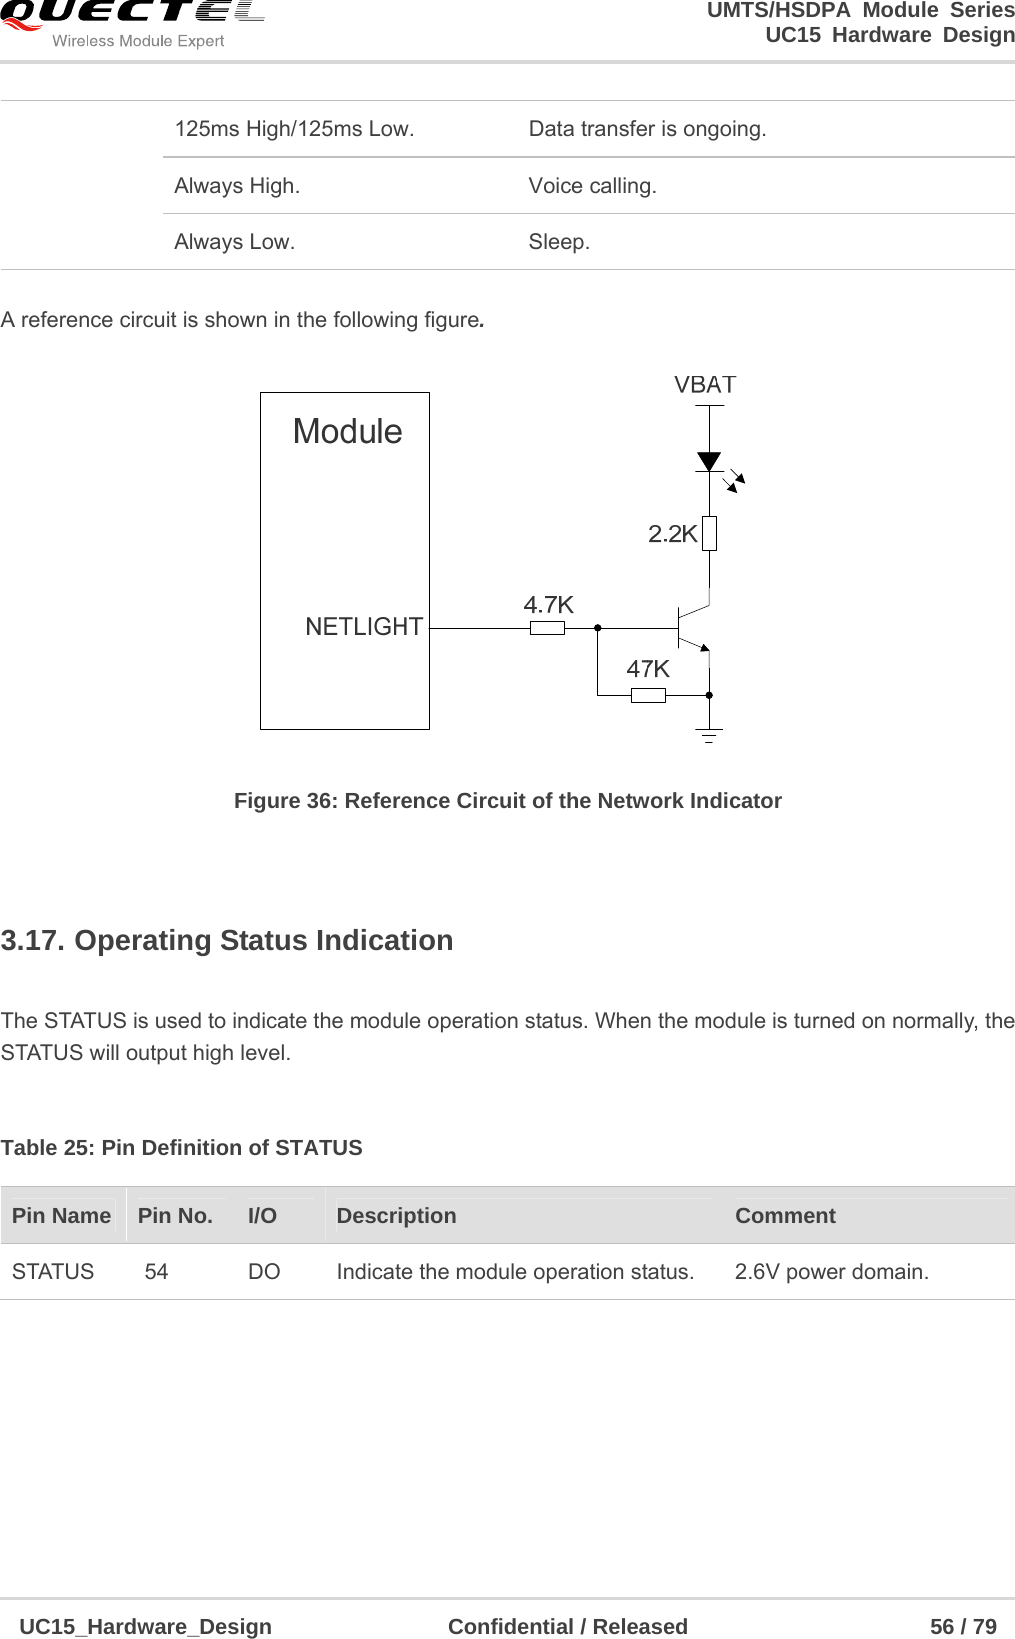                                                                        UMTS/HSDPA Module Series                                                                 UC15 Hardware Design  UC15_Hardware_Design                Confidential / Released                      56 / 79     A reference circuit is shown in the following figure.  Figure 36: Reference Circuit of the Network Indicator  3.17. Operating Status Indication  The STATUS is used to indicate the module operation status. When the module is turned on normally, the STATUS will output high level.    Table 25: Pin Definition of STATUS        125ms High/125ms Low.  Data transfer is ongoing. Always High.  Voice calling. Always Low.  Sleep. Pin Name    Pin No.  I/O  Description   Comment STATUS  54  DO  Indicate the module operation status.  2.6V power domain. 